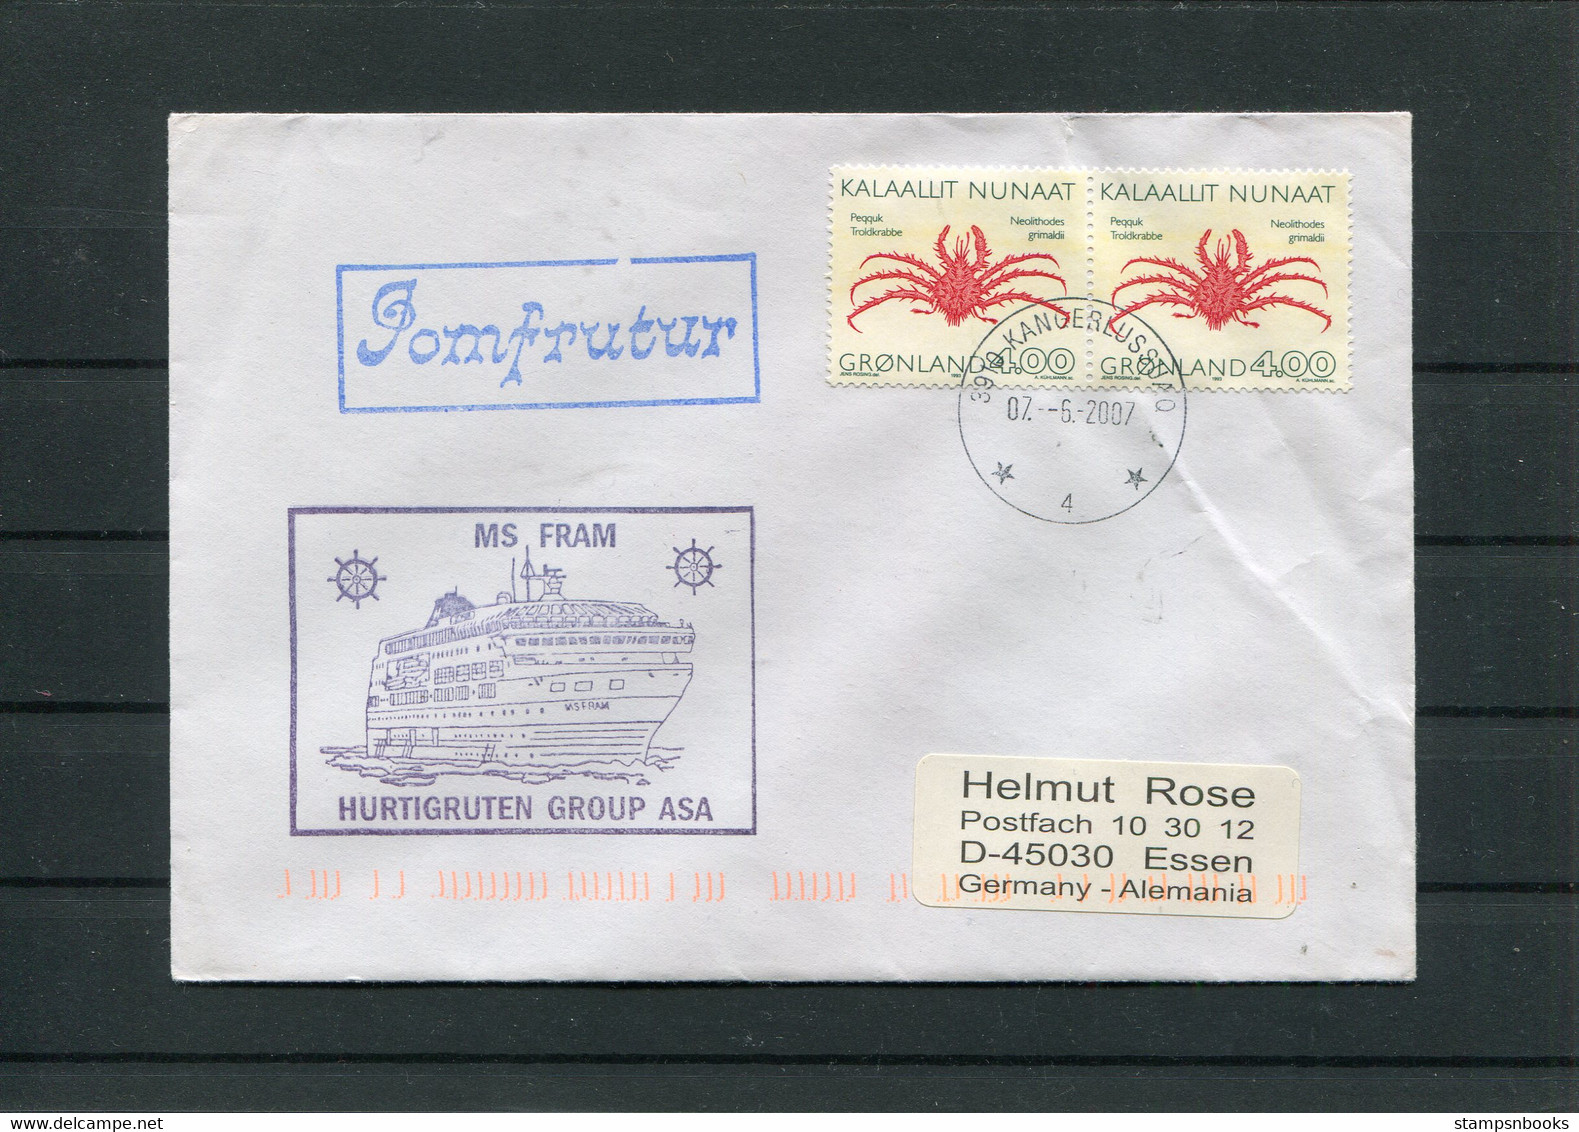 2007 Greenland MS FRAM Ship Cover. - Covers & Documents